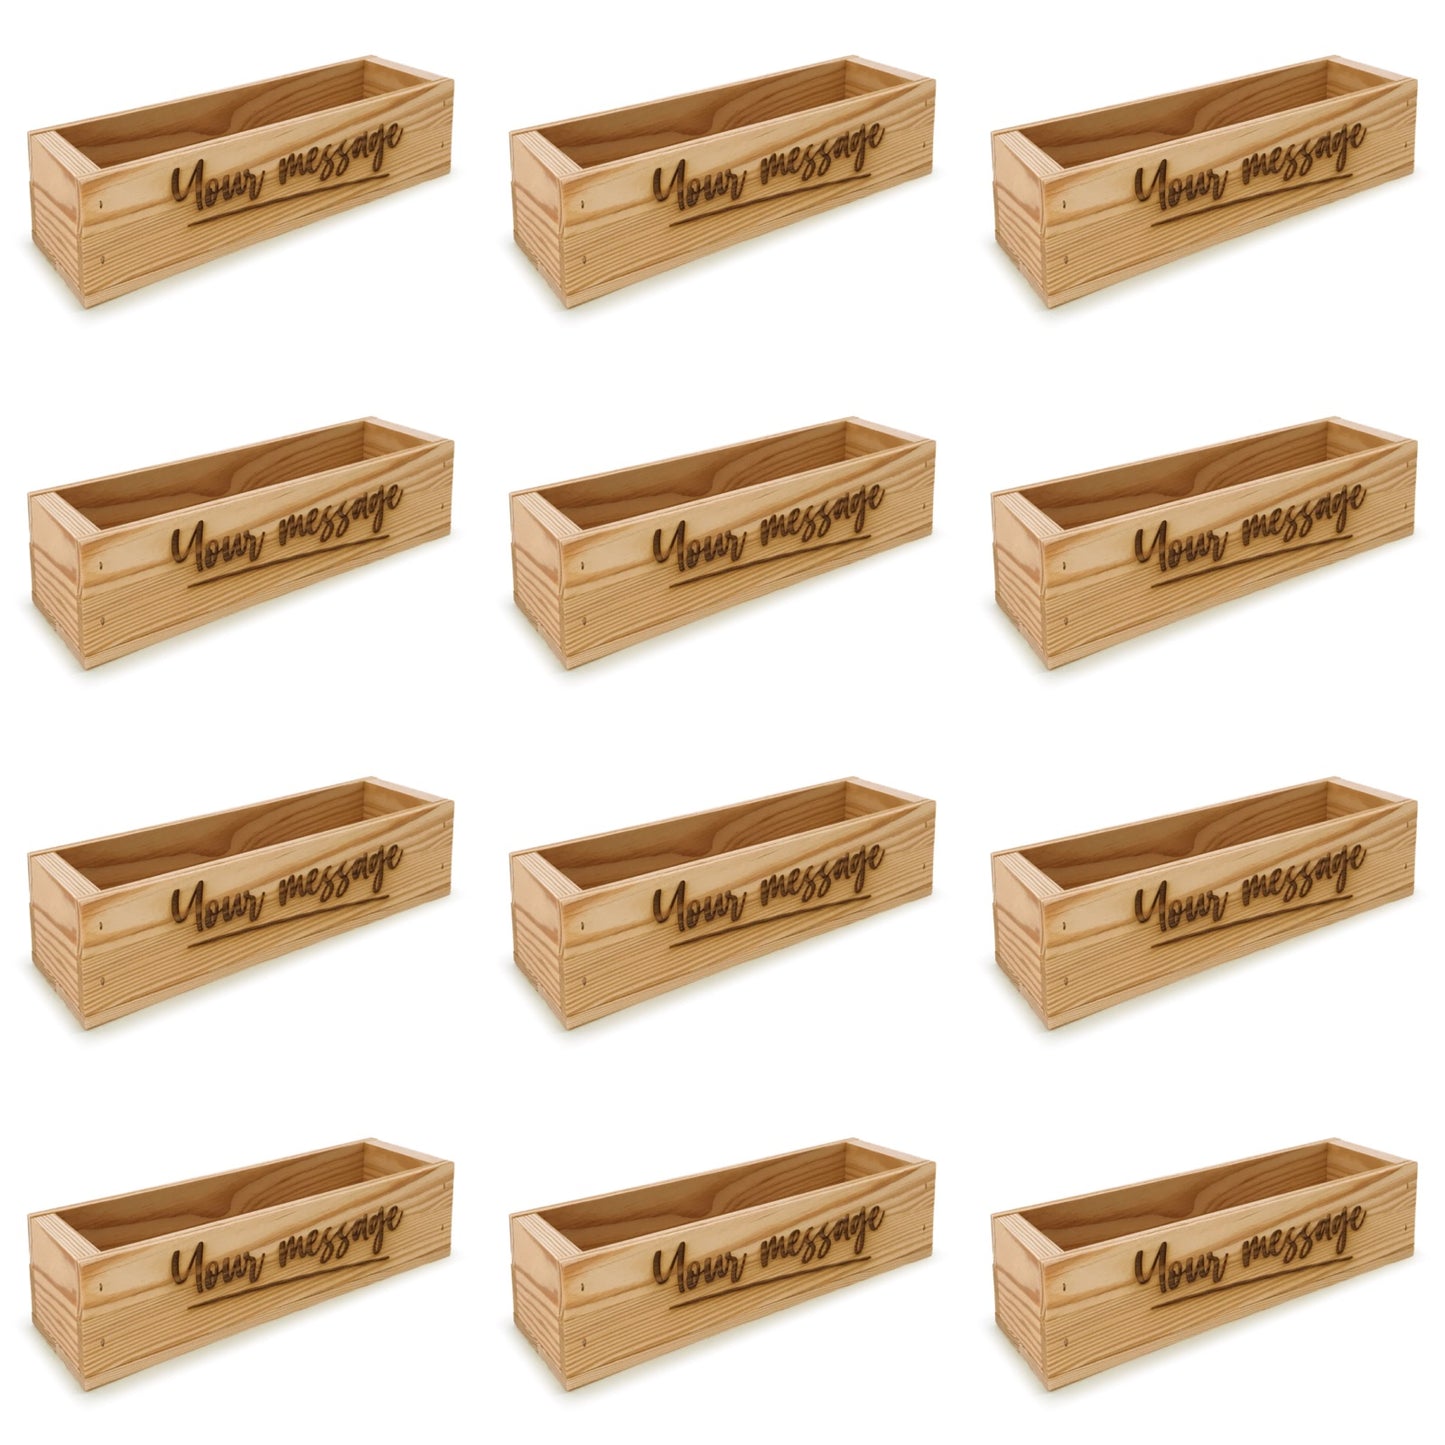 12 Single bottle wine crates with custom message 13x3.5x3.5